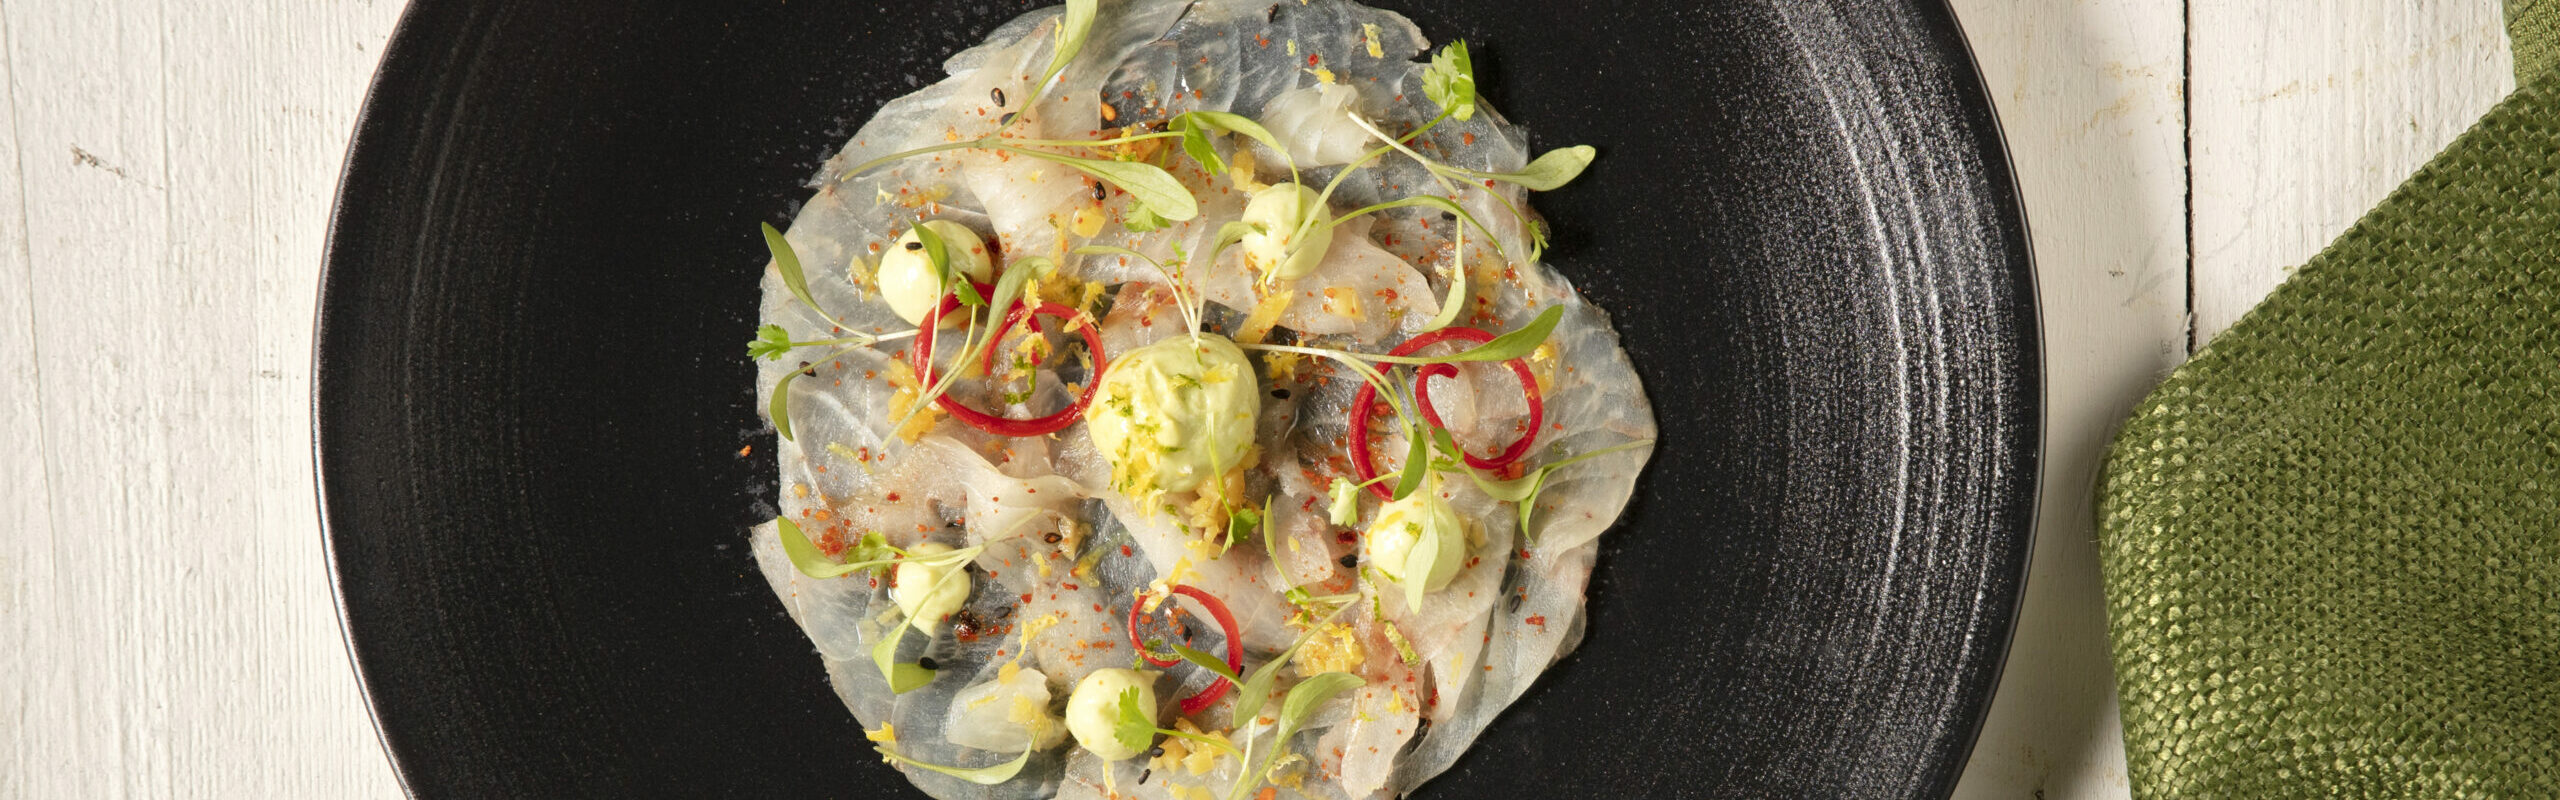 Stone bass ceviche, avocado lime purée, gin ger dressing, coriander cress, pickled red chilli, togarashi (c)